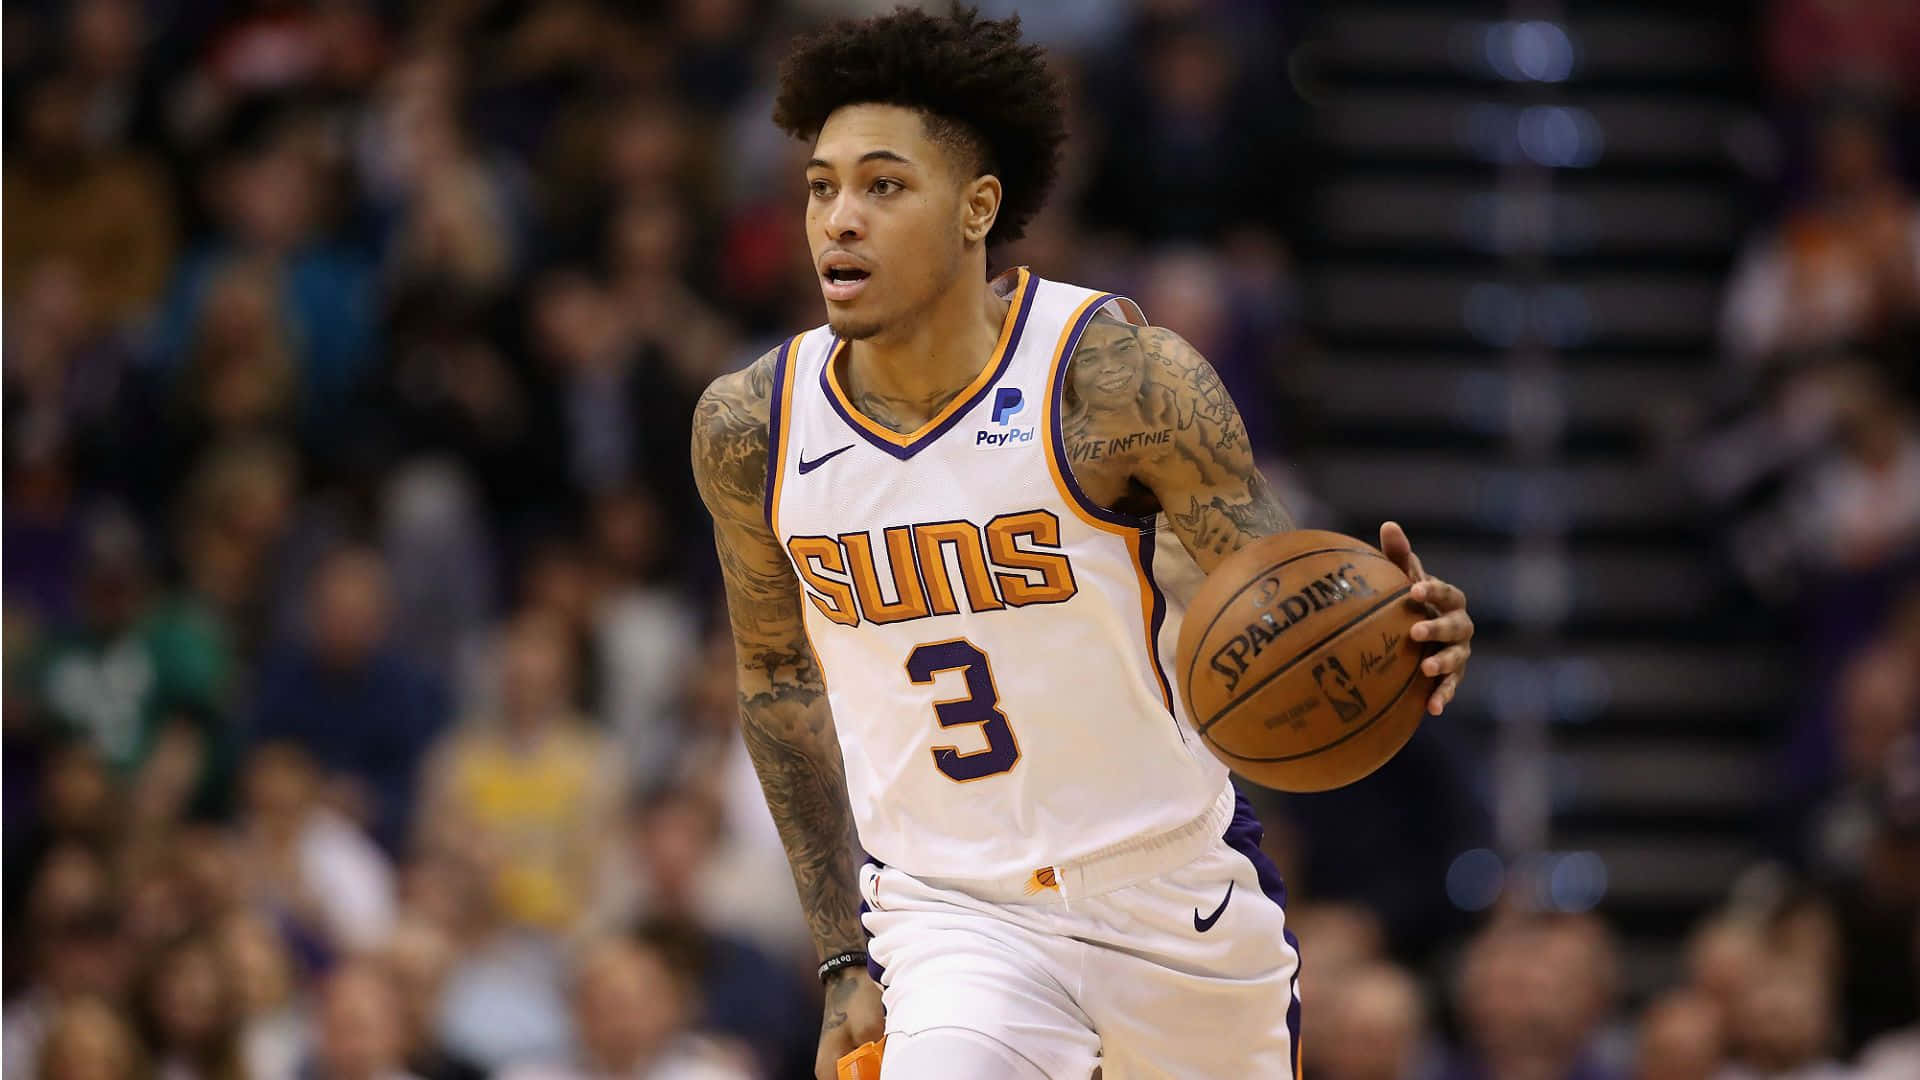 Download NBA Player Kelly Oubre Jr on the court Wallpaper